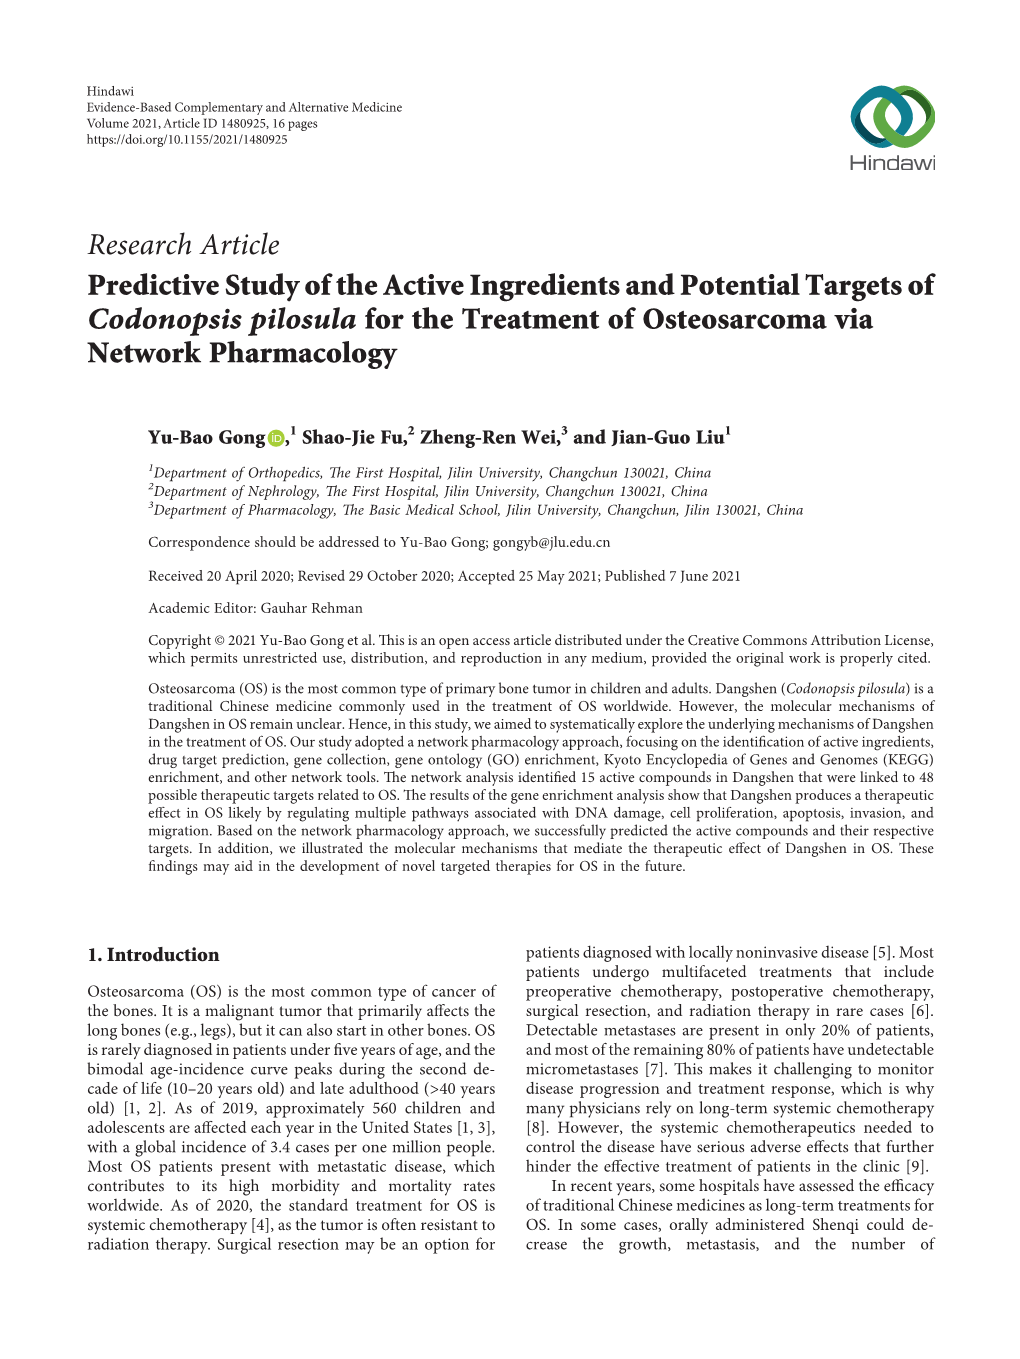 Predictive Study of the Active Ingredients and Potential Targets of Codonopsis Pilosula for the Treatment of Osteosarcoma Via Network Pharmacology